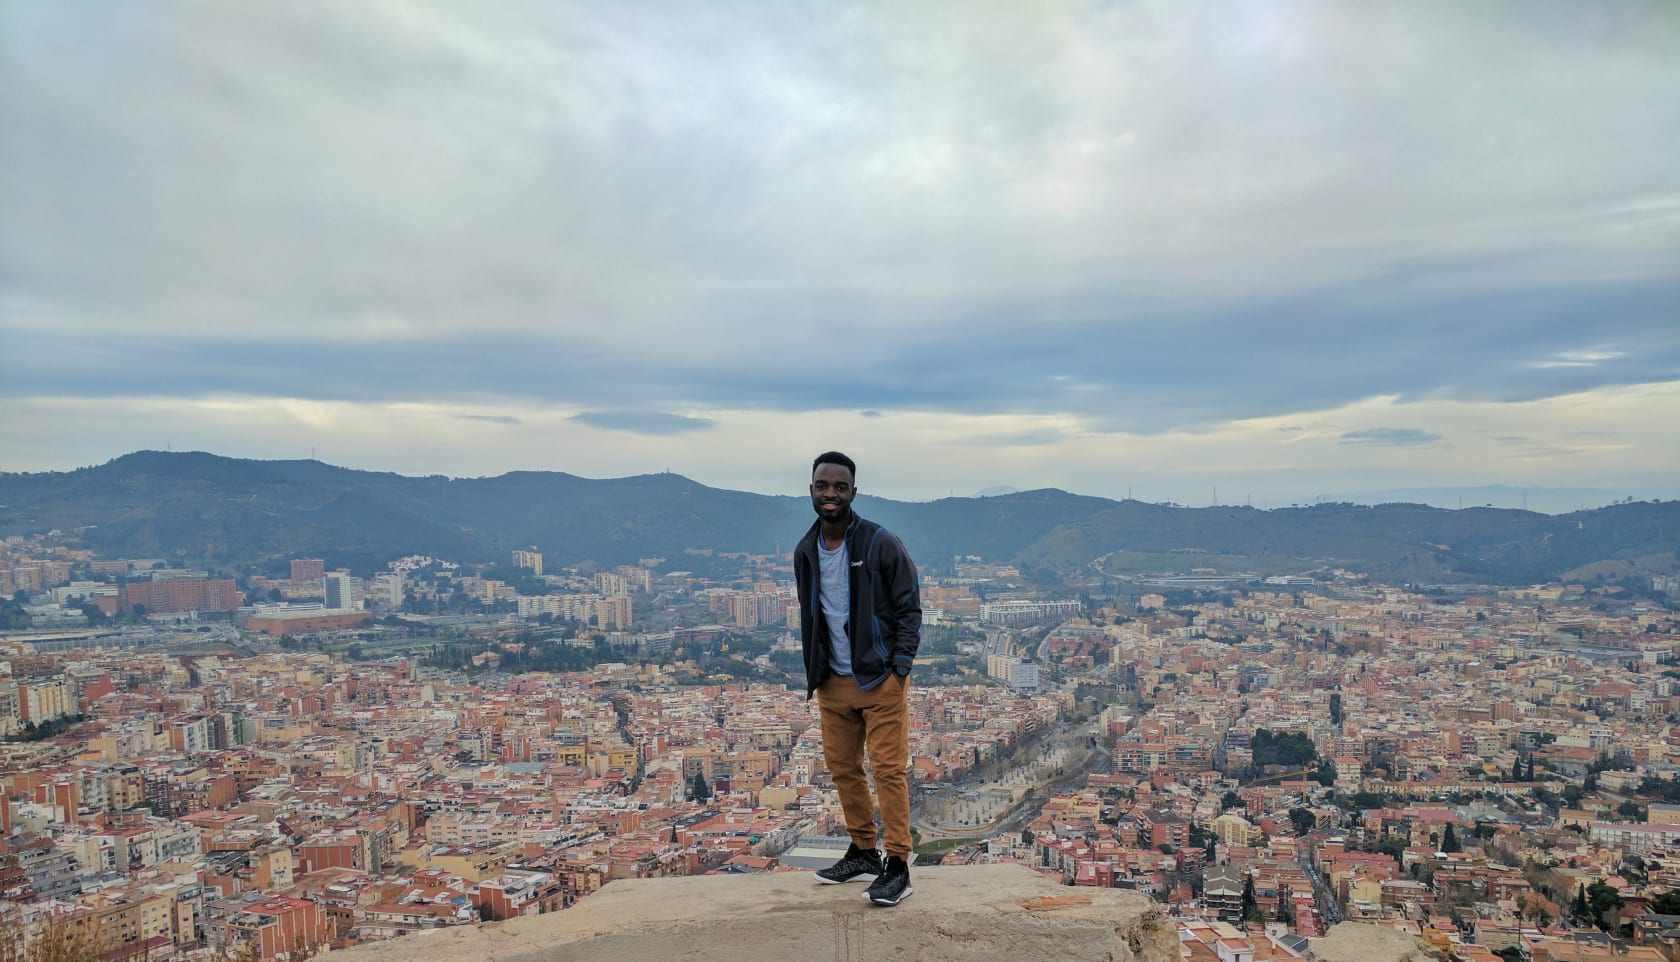 A student standing on a rock overlooking a view of the Barcelona cityscape.